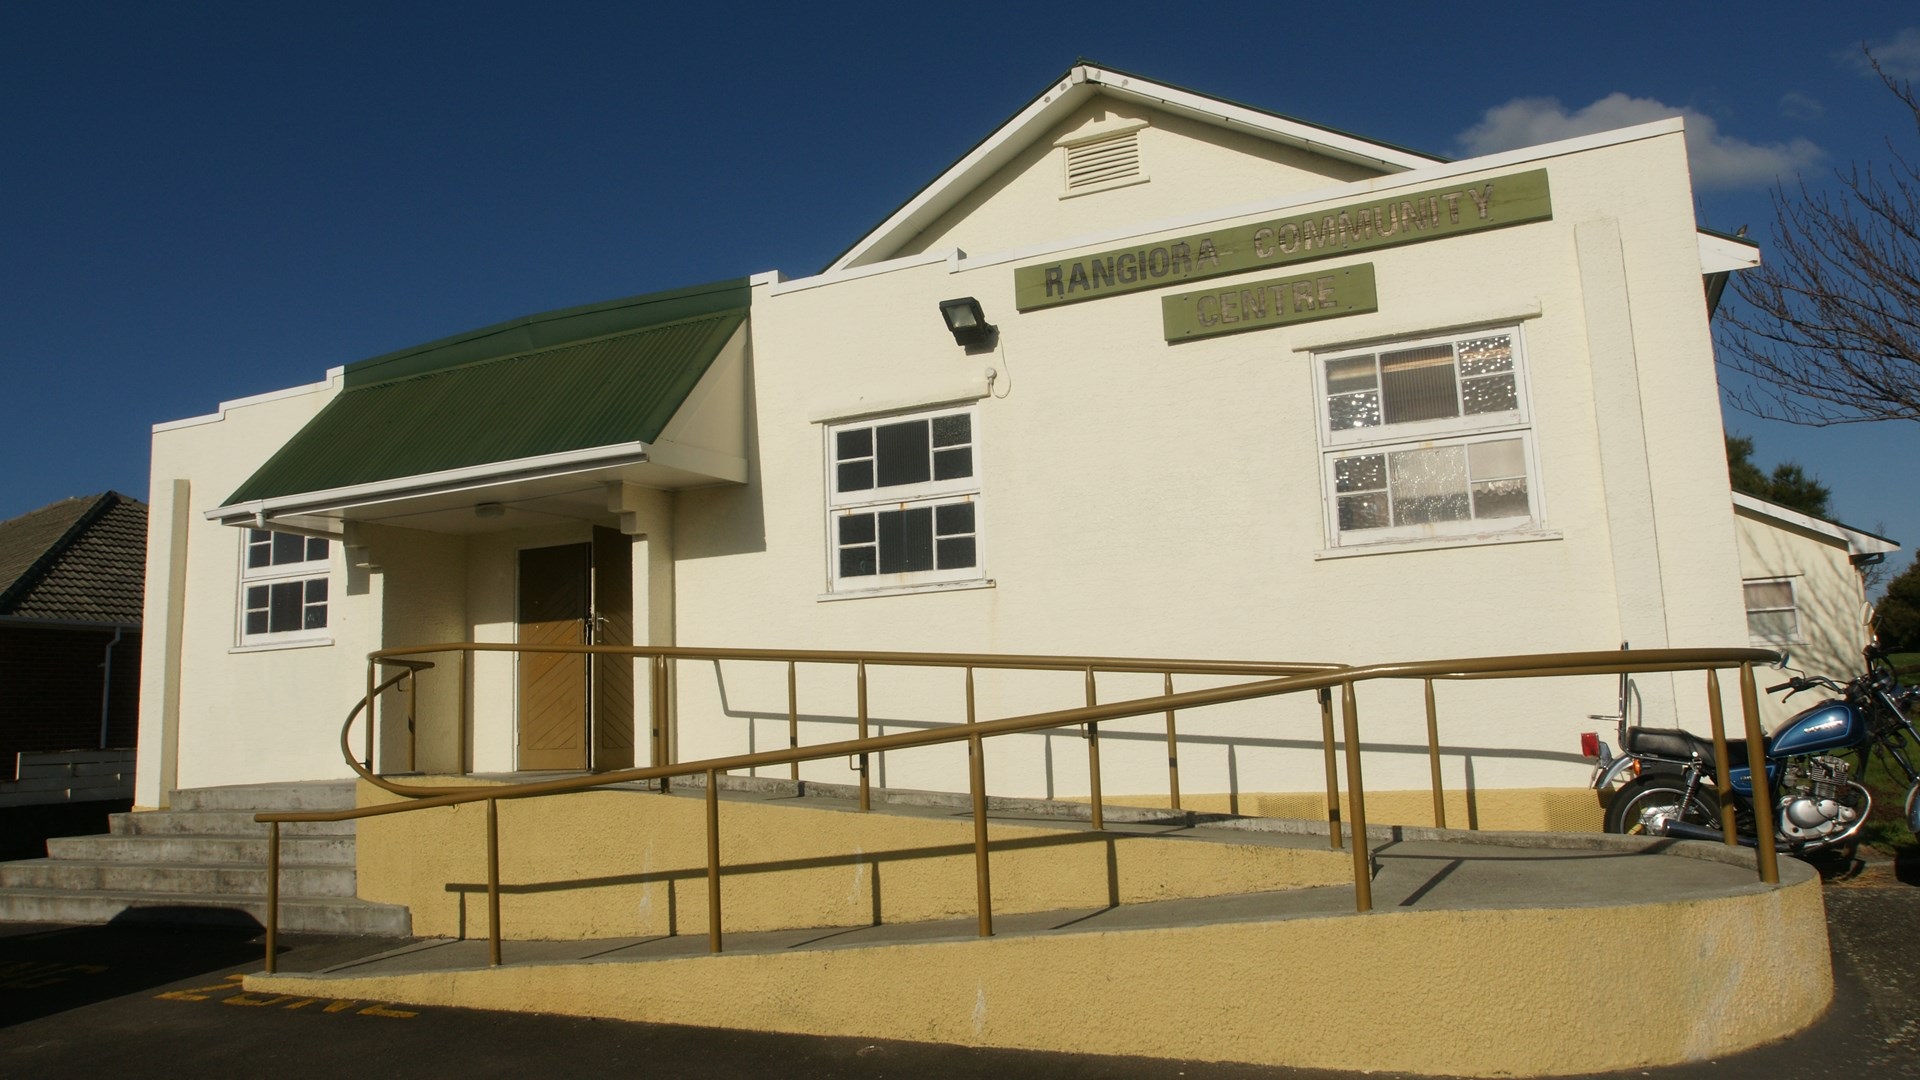 A typical 1950s public hall, built from stucco with a ramp up to the front doors.